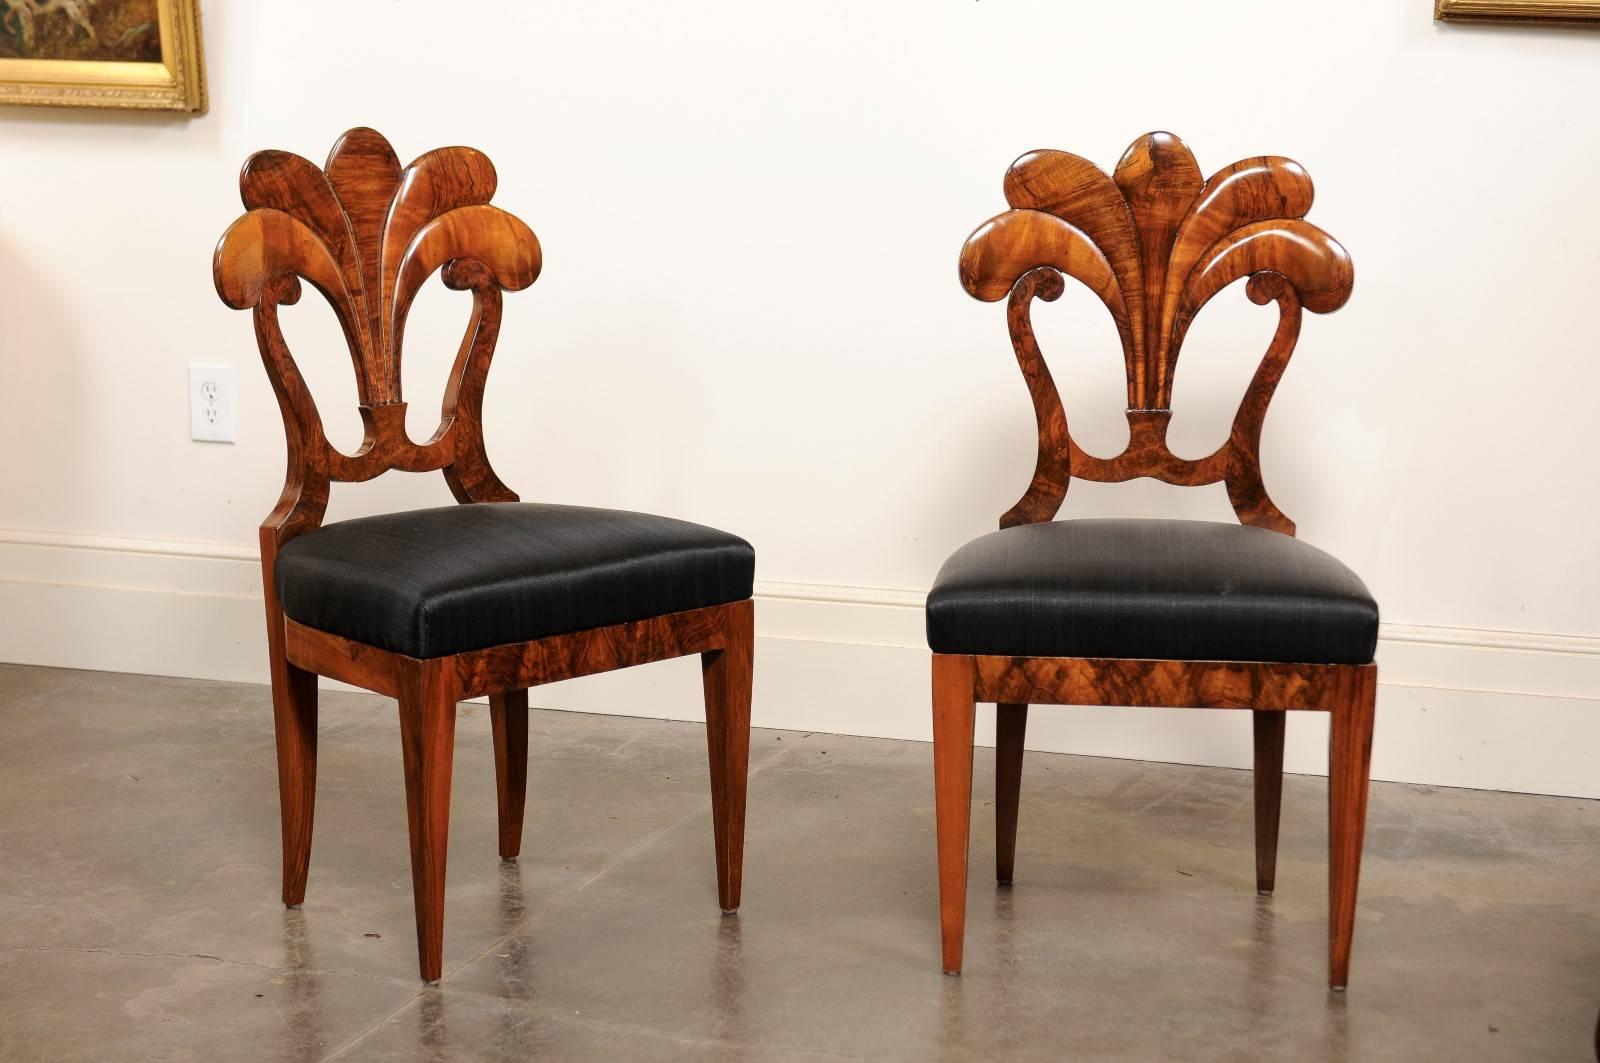 This set of six Austrian Biedermeier chairs from the first quarter of the 19th century features exquisitely carved fan shaped backs supported on each side by delicate volutes. This is one of the most spectacular set of Biedermeier dining chairs we